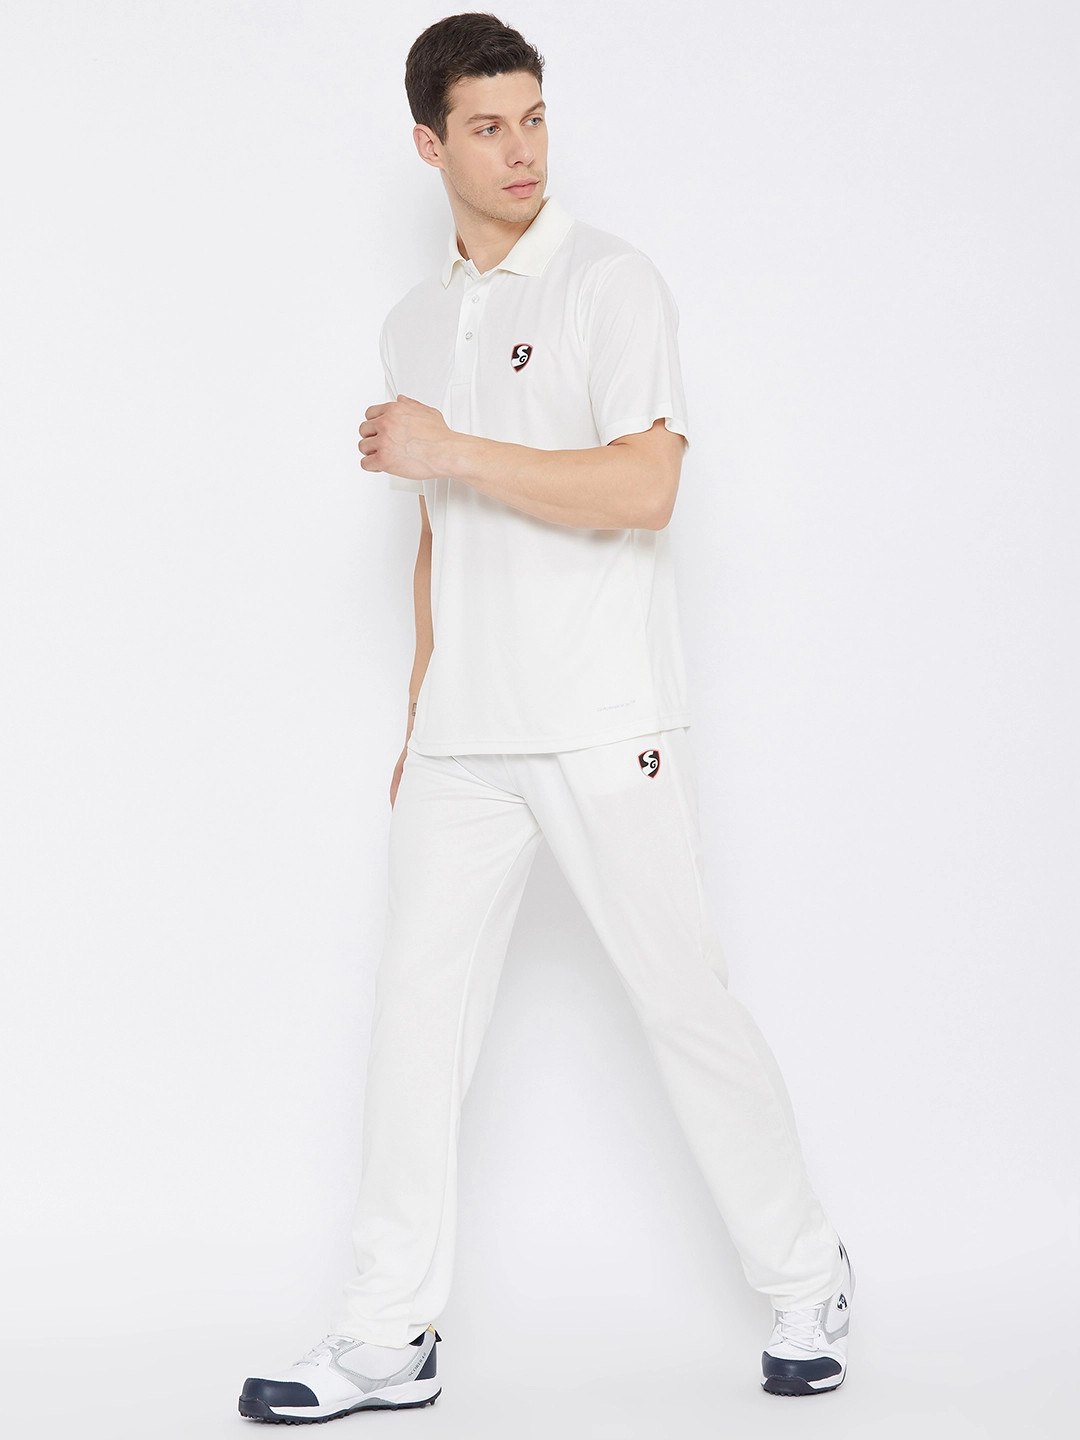 Buy Men Off-White Club Cricket Track Pant From Fancode Shop.